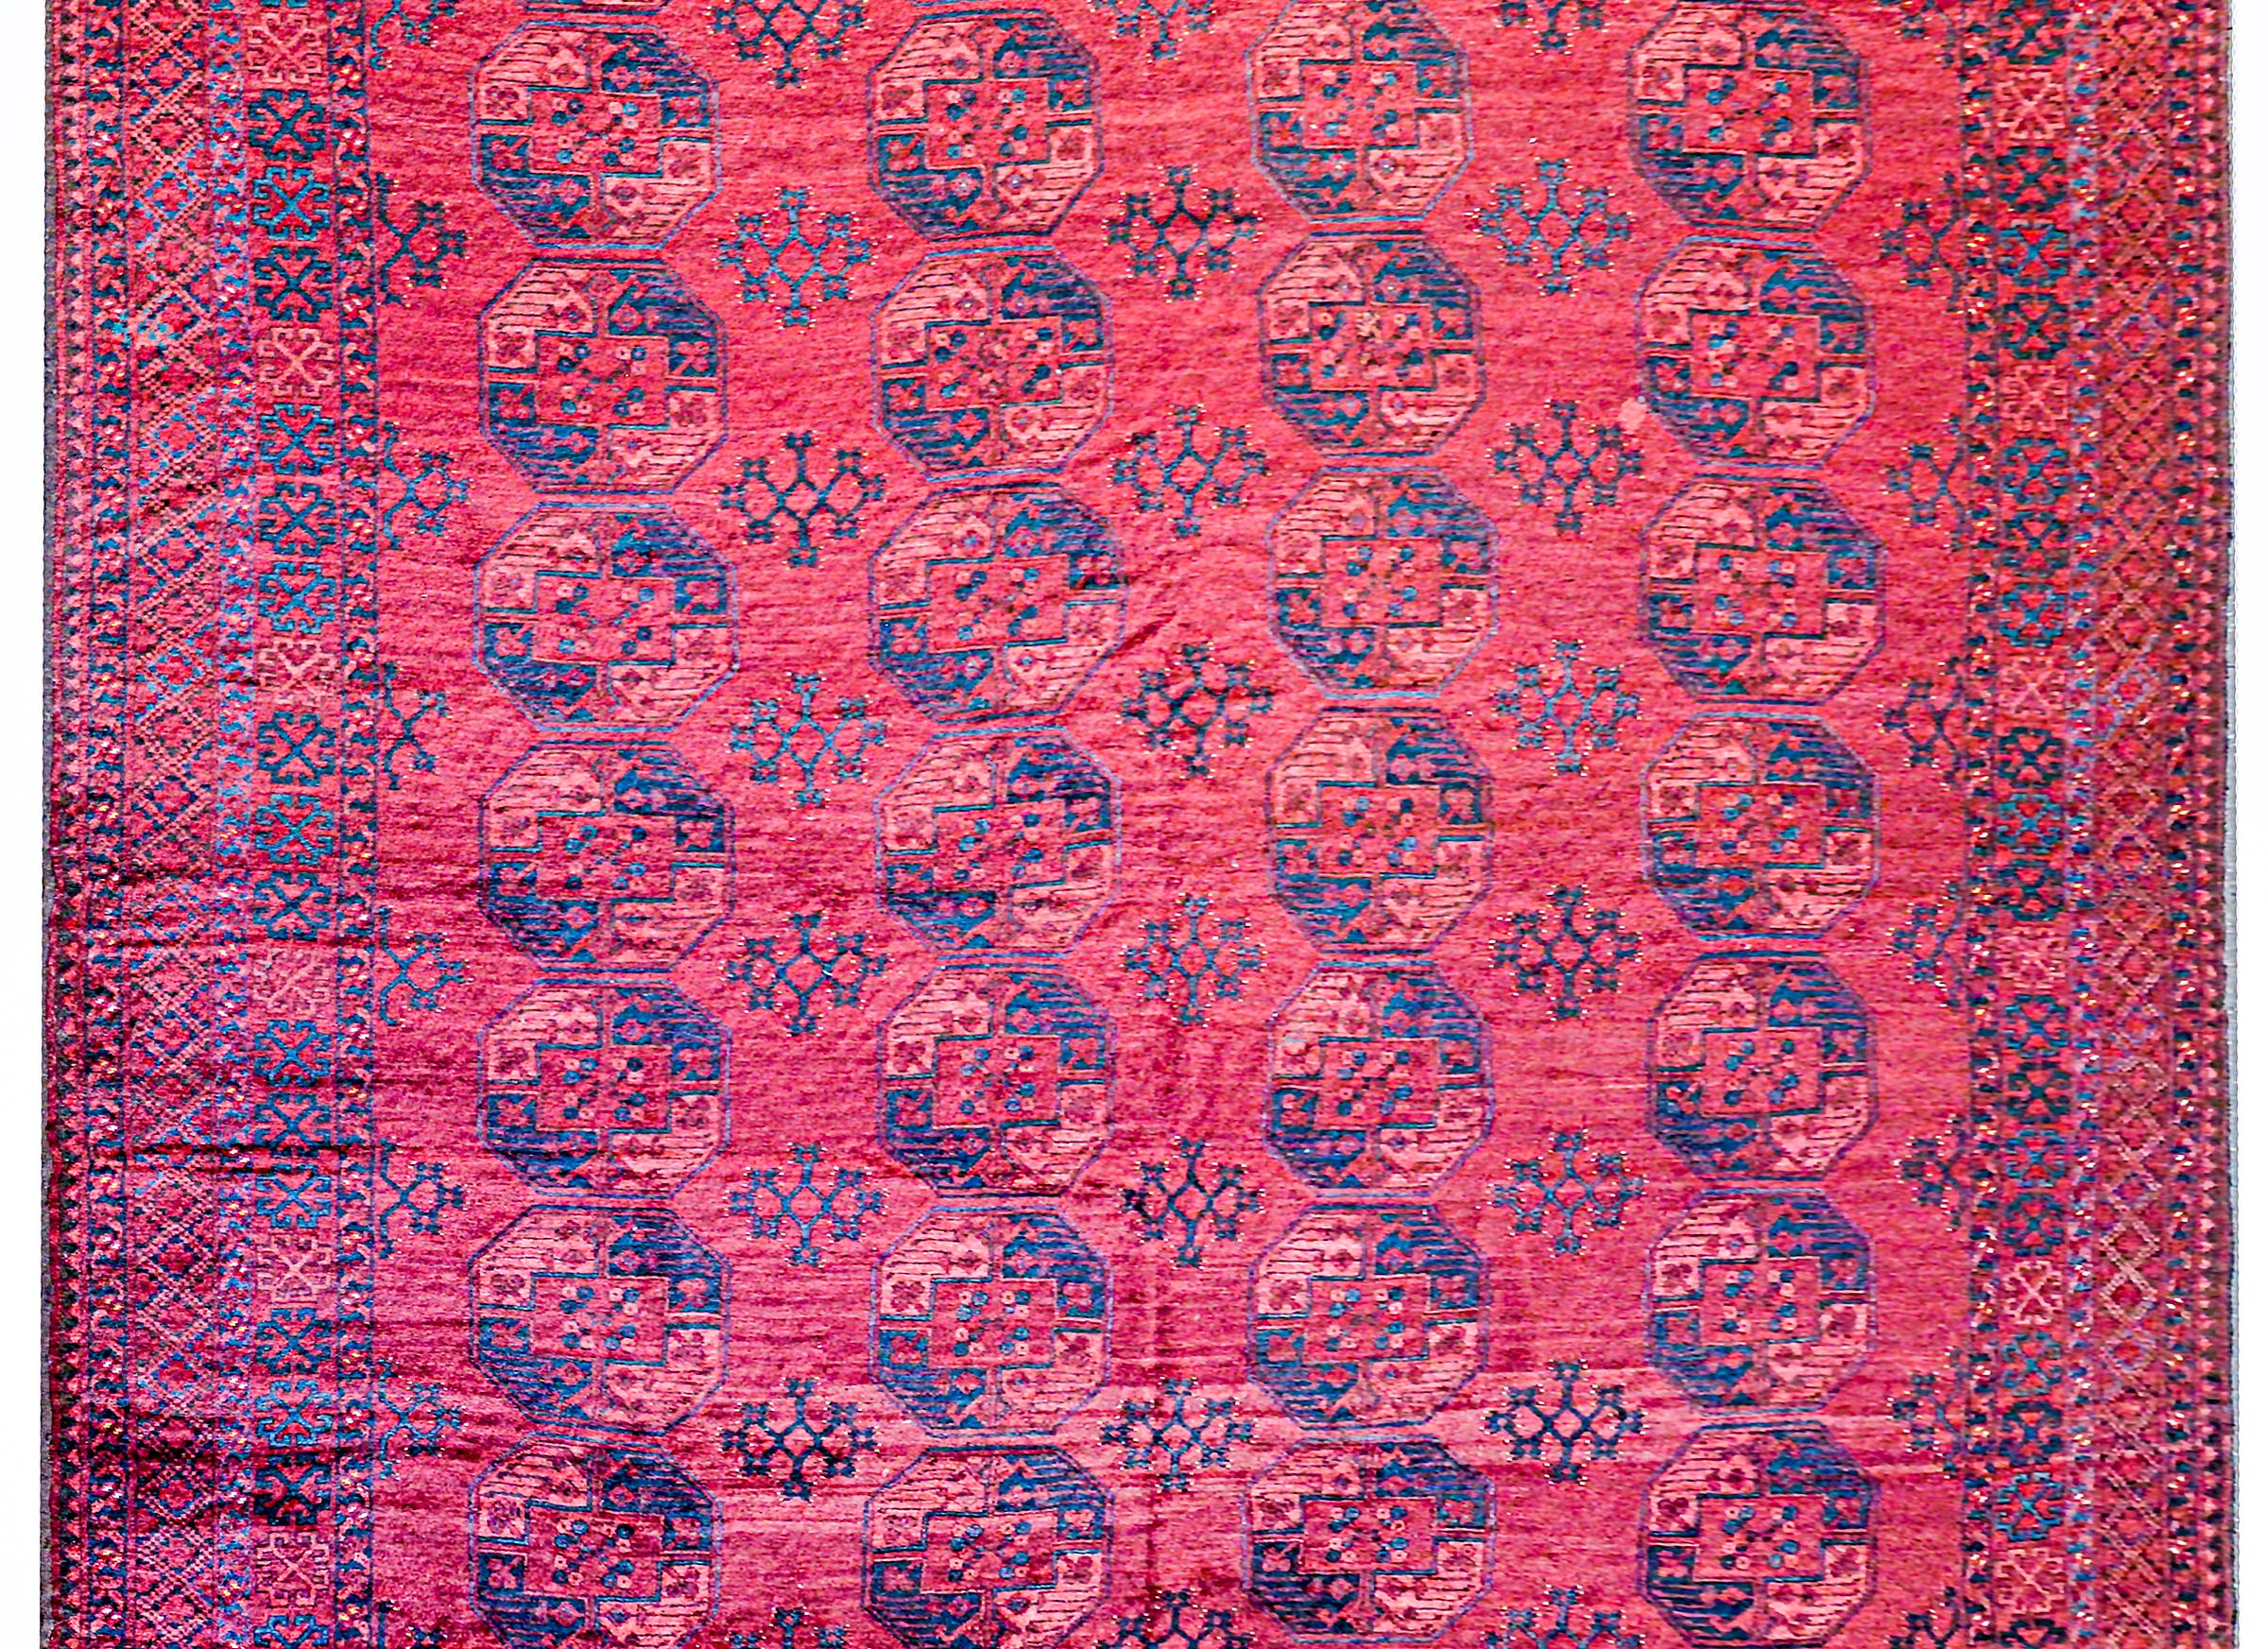 A grand-scale early 20th century Afghani Bashir rug with multiple large octagonal medallions woven in indigo and gold, on a crimson background surrounded by a complementary geometric lattice and stylized floral patterned border.